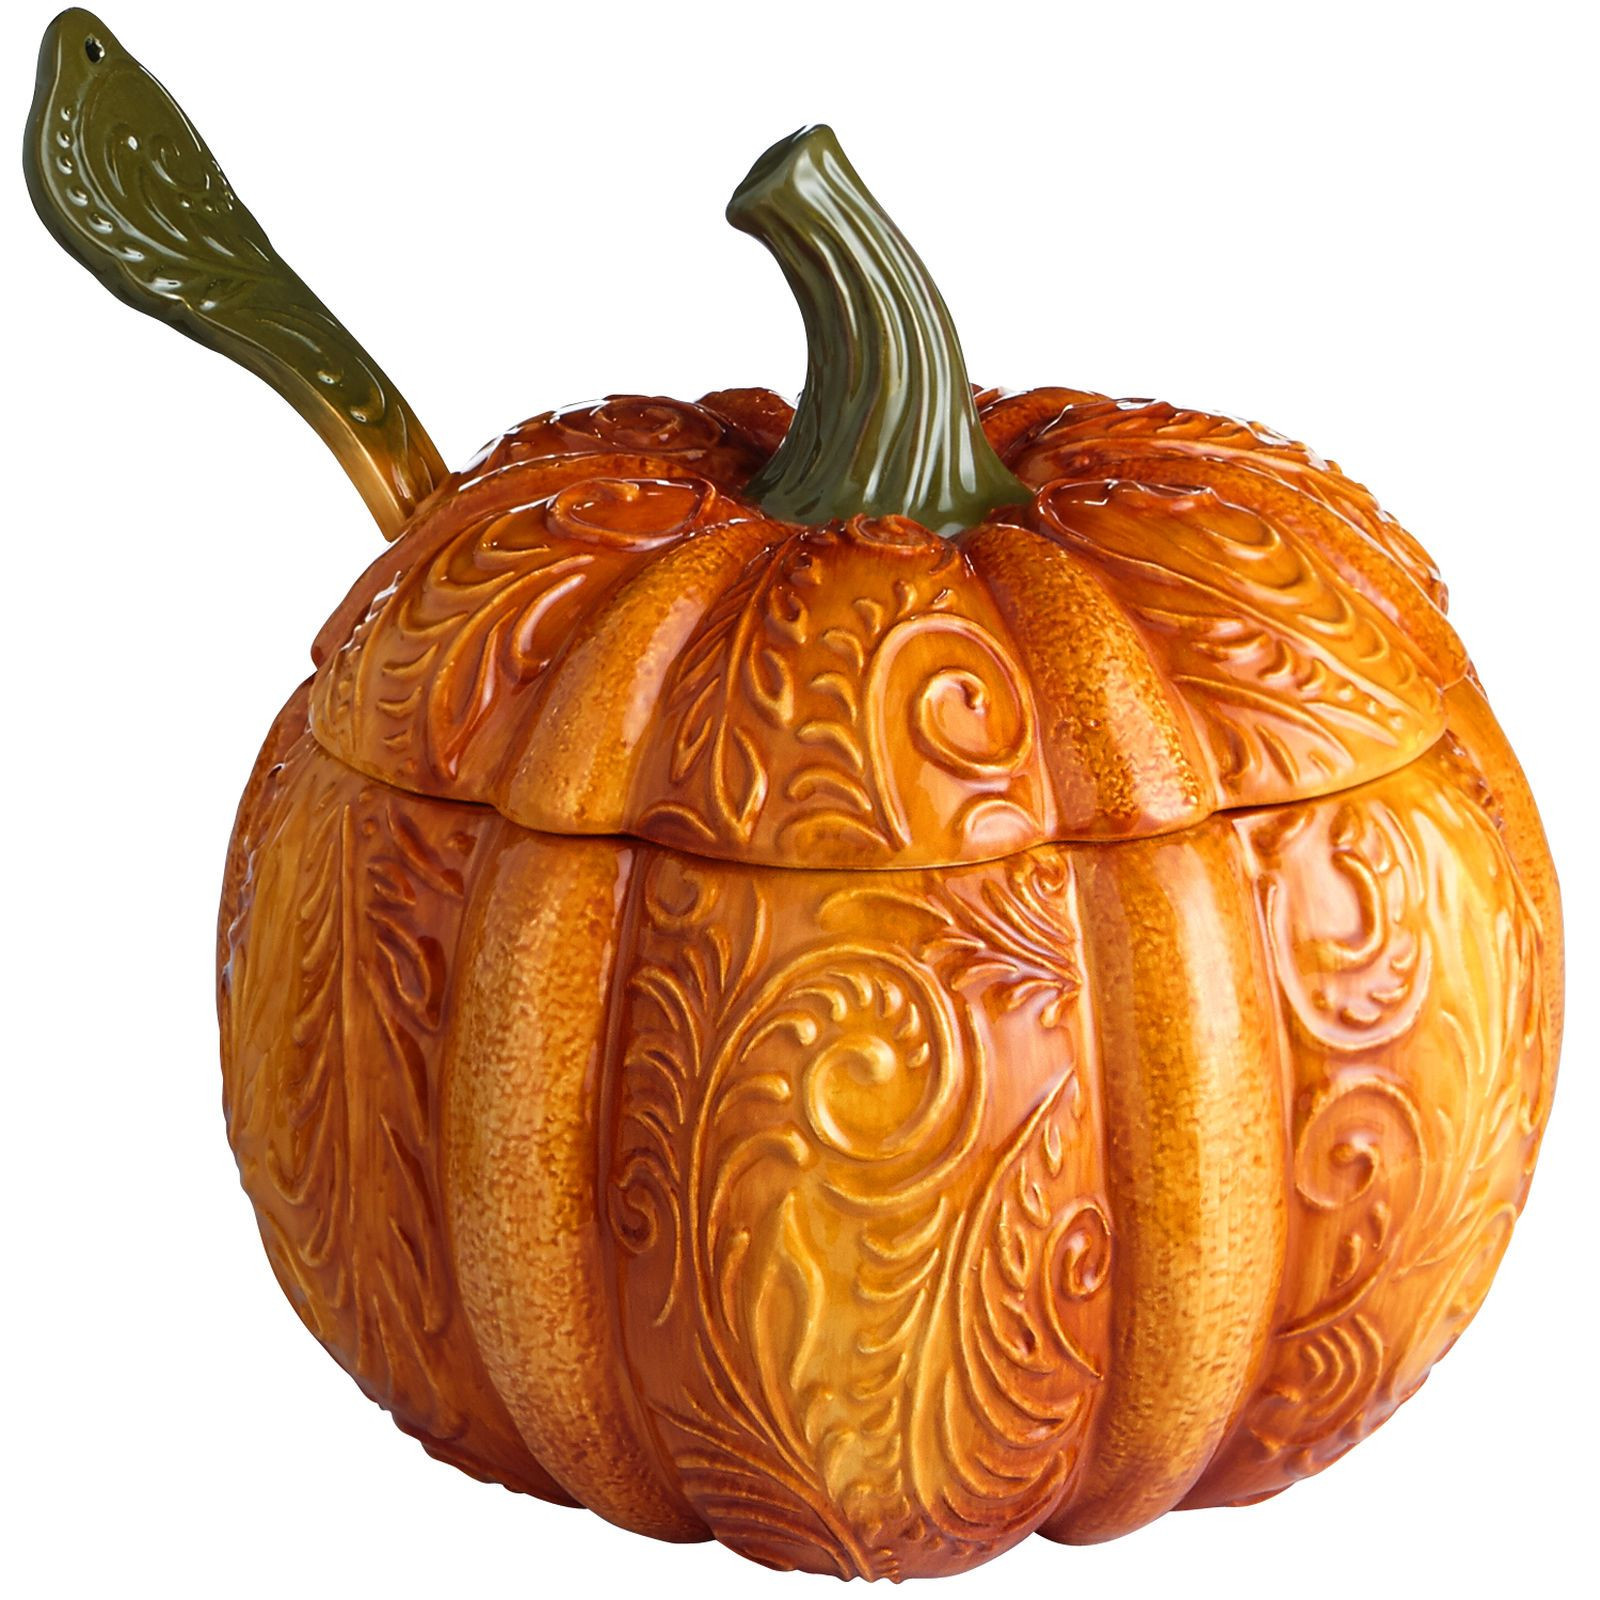 20 Awesome Pier 1 Owl Vase 2024 free download pier 1 owl vase of pumpkin tureen with ladle pier 1 imports 44 95 fall halloween throughout pumpkin tureen with ladle pier 1 imports 44 95